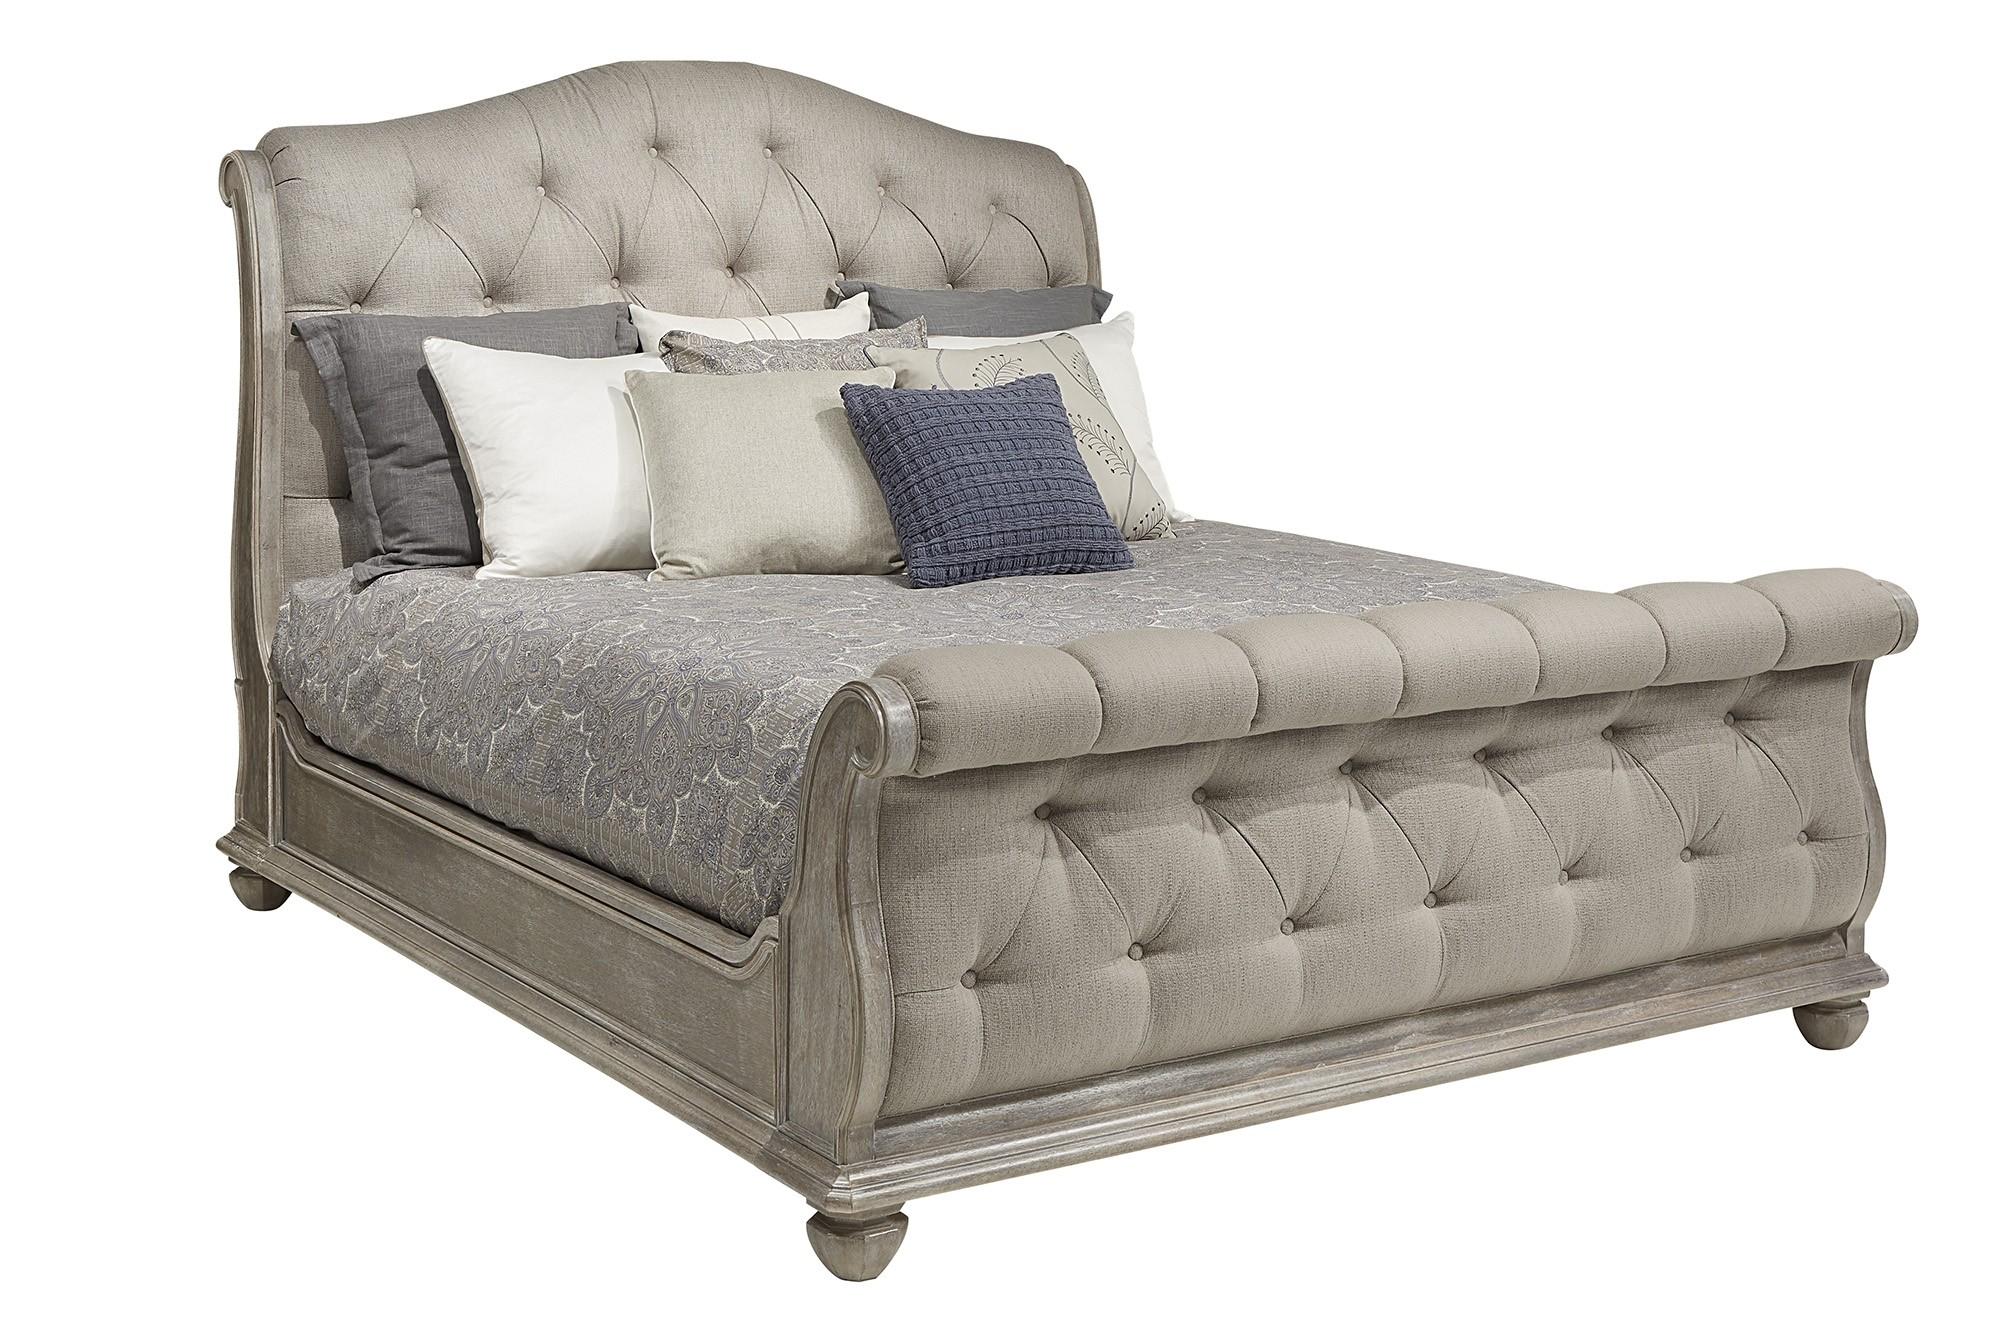 Traditional Sleigh Bed HD-80005 HD-80005-Q in Wash Oak, Light Gray Fabric